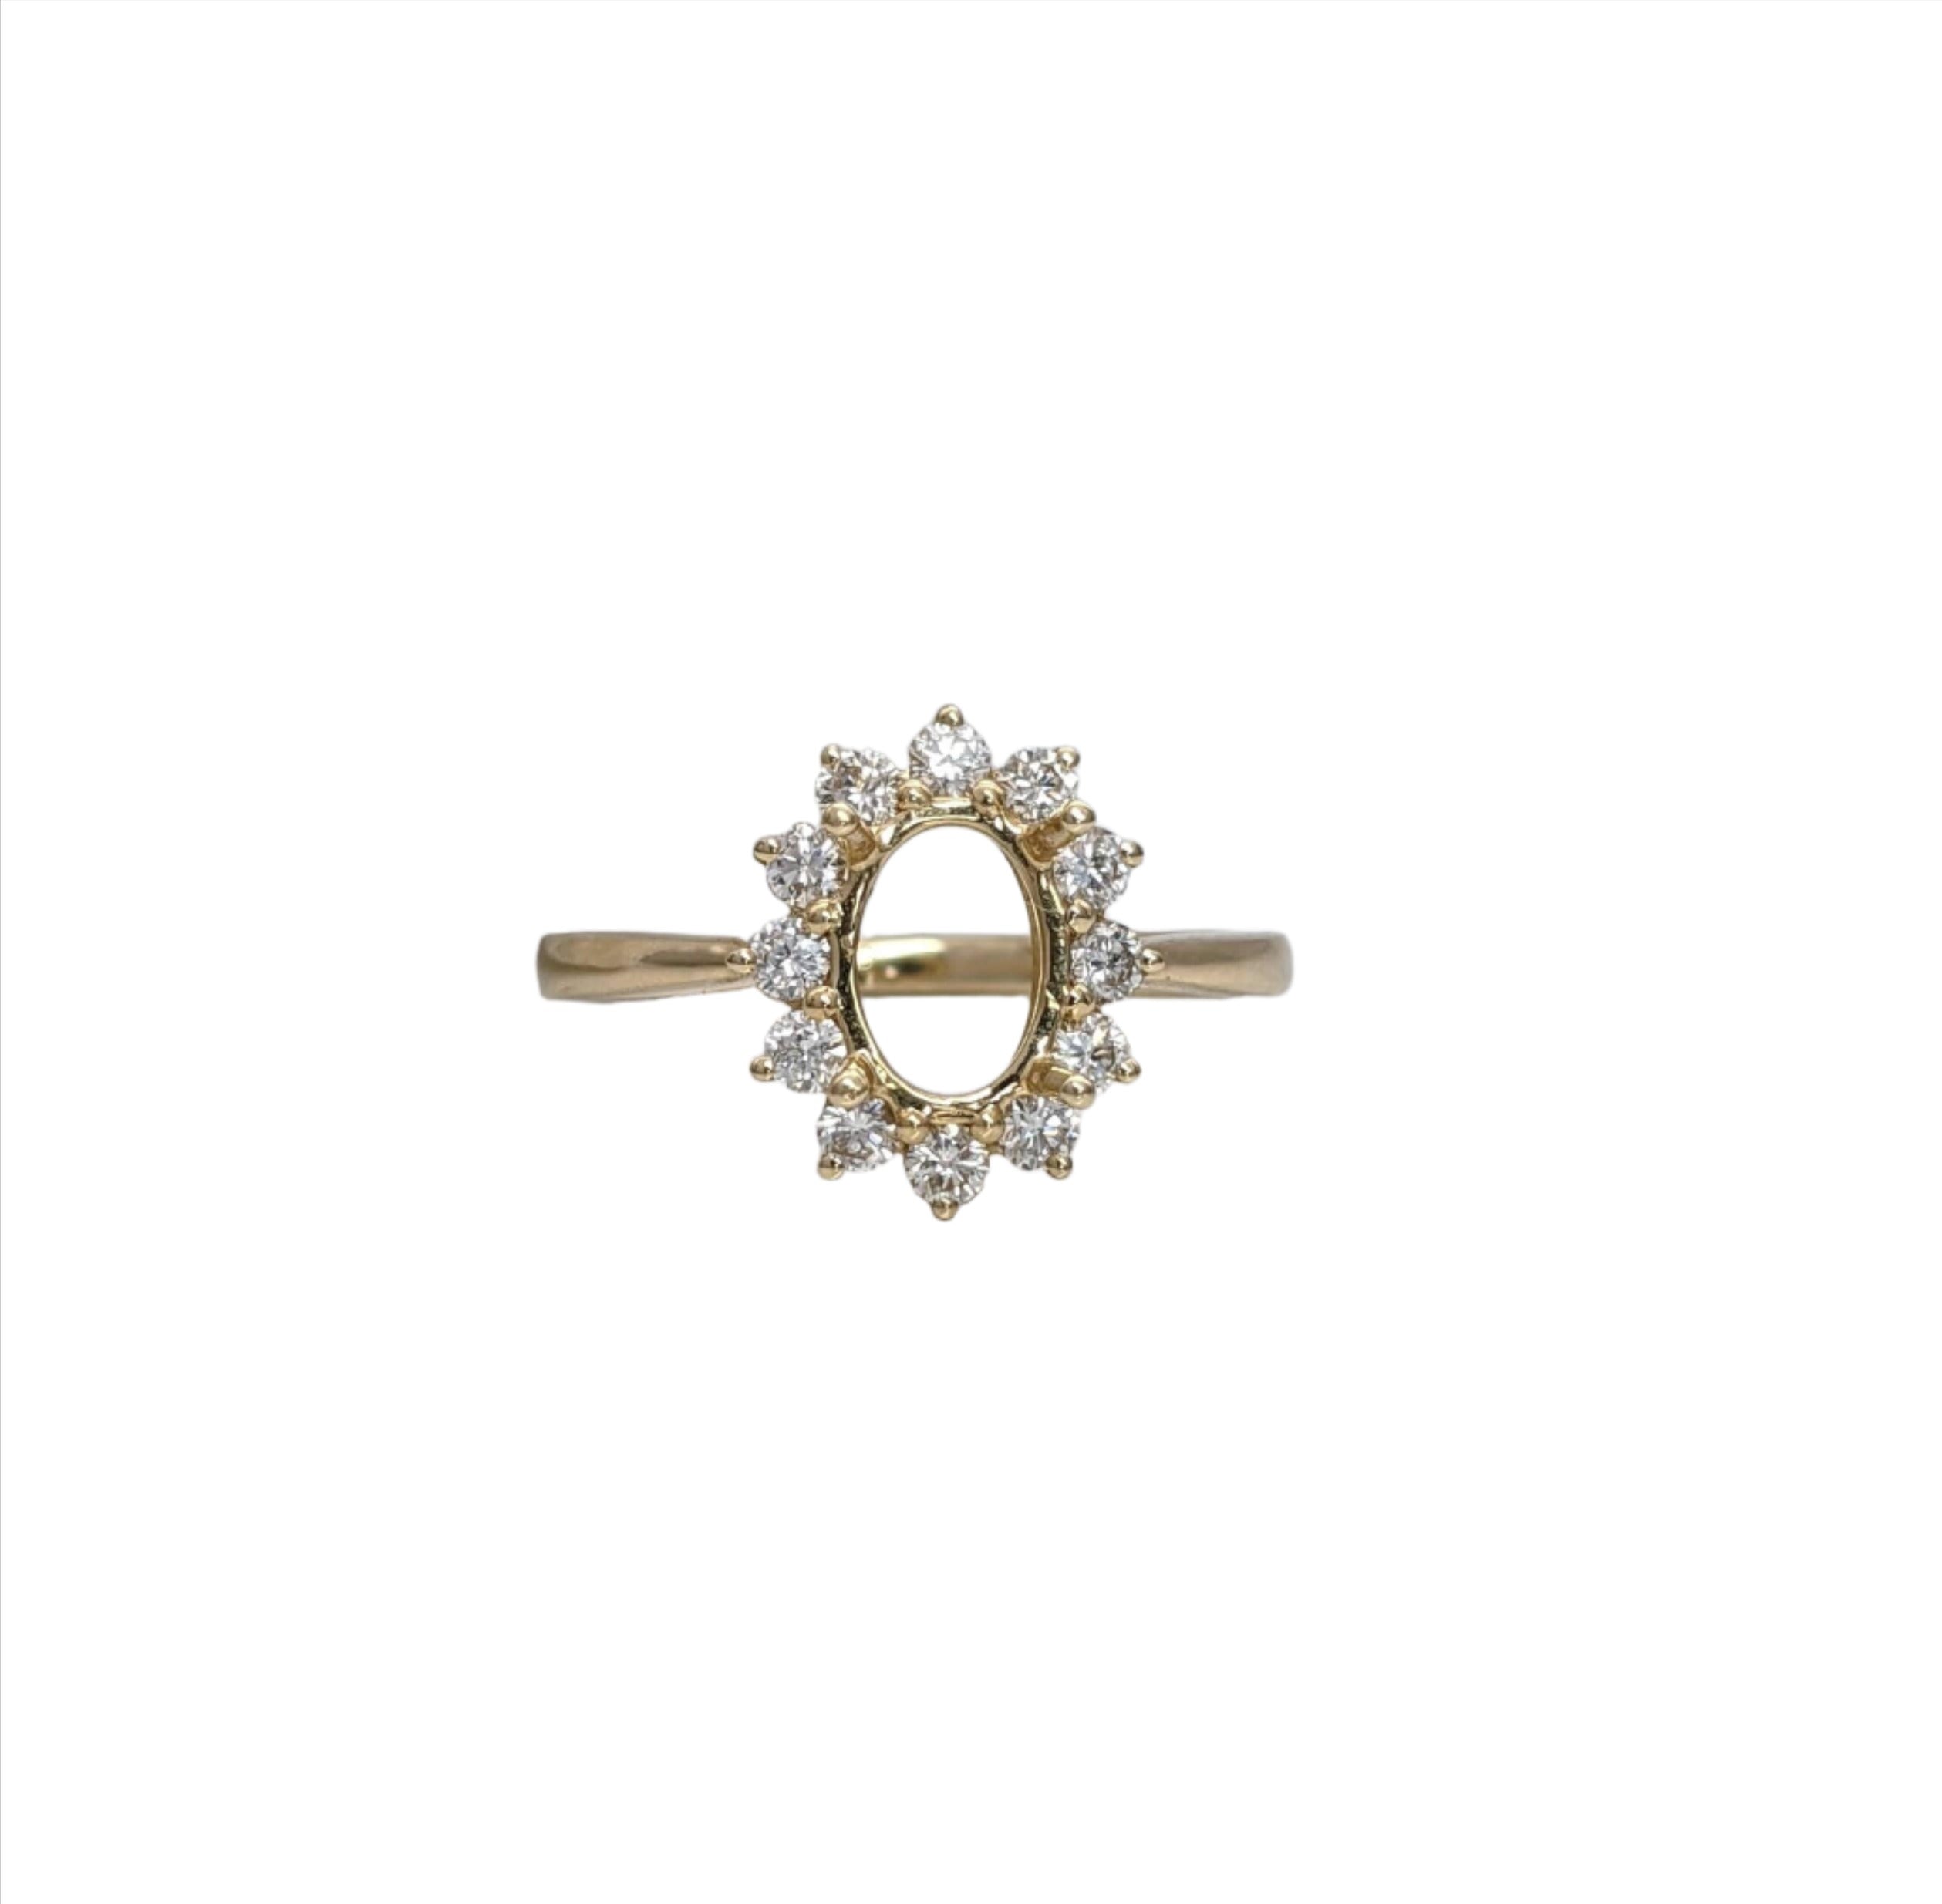 Lady Diana Style Ring w Natural Diamond Floral Halo Semi Mount Setting in 14K Yellow, White, or Rose Gold | Oval 5x4 6x4 7x5 8x6mm | Custom